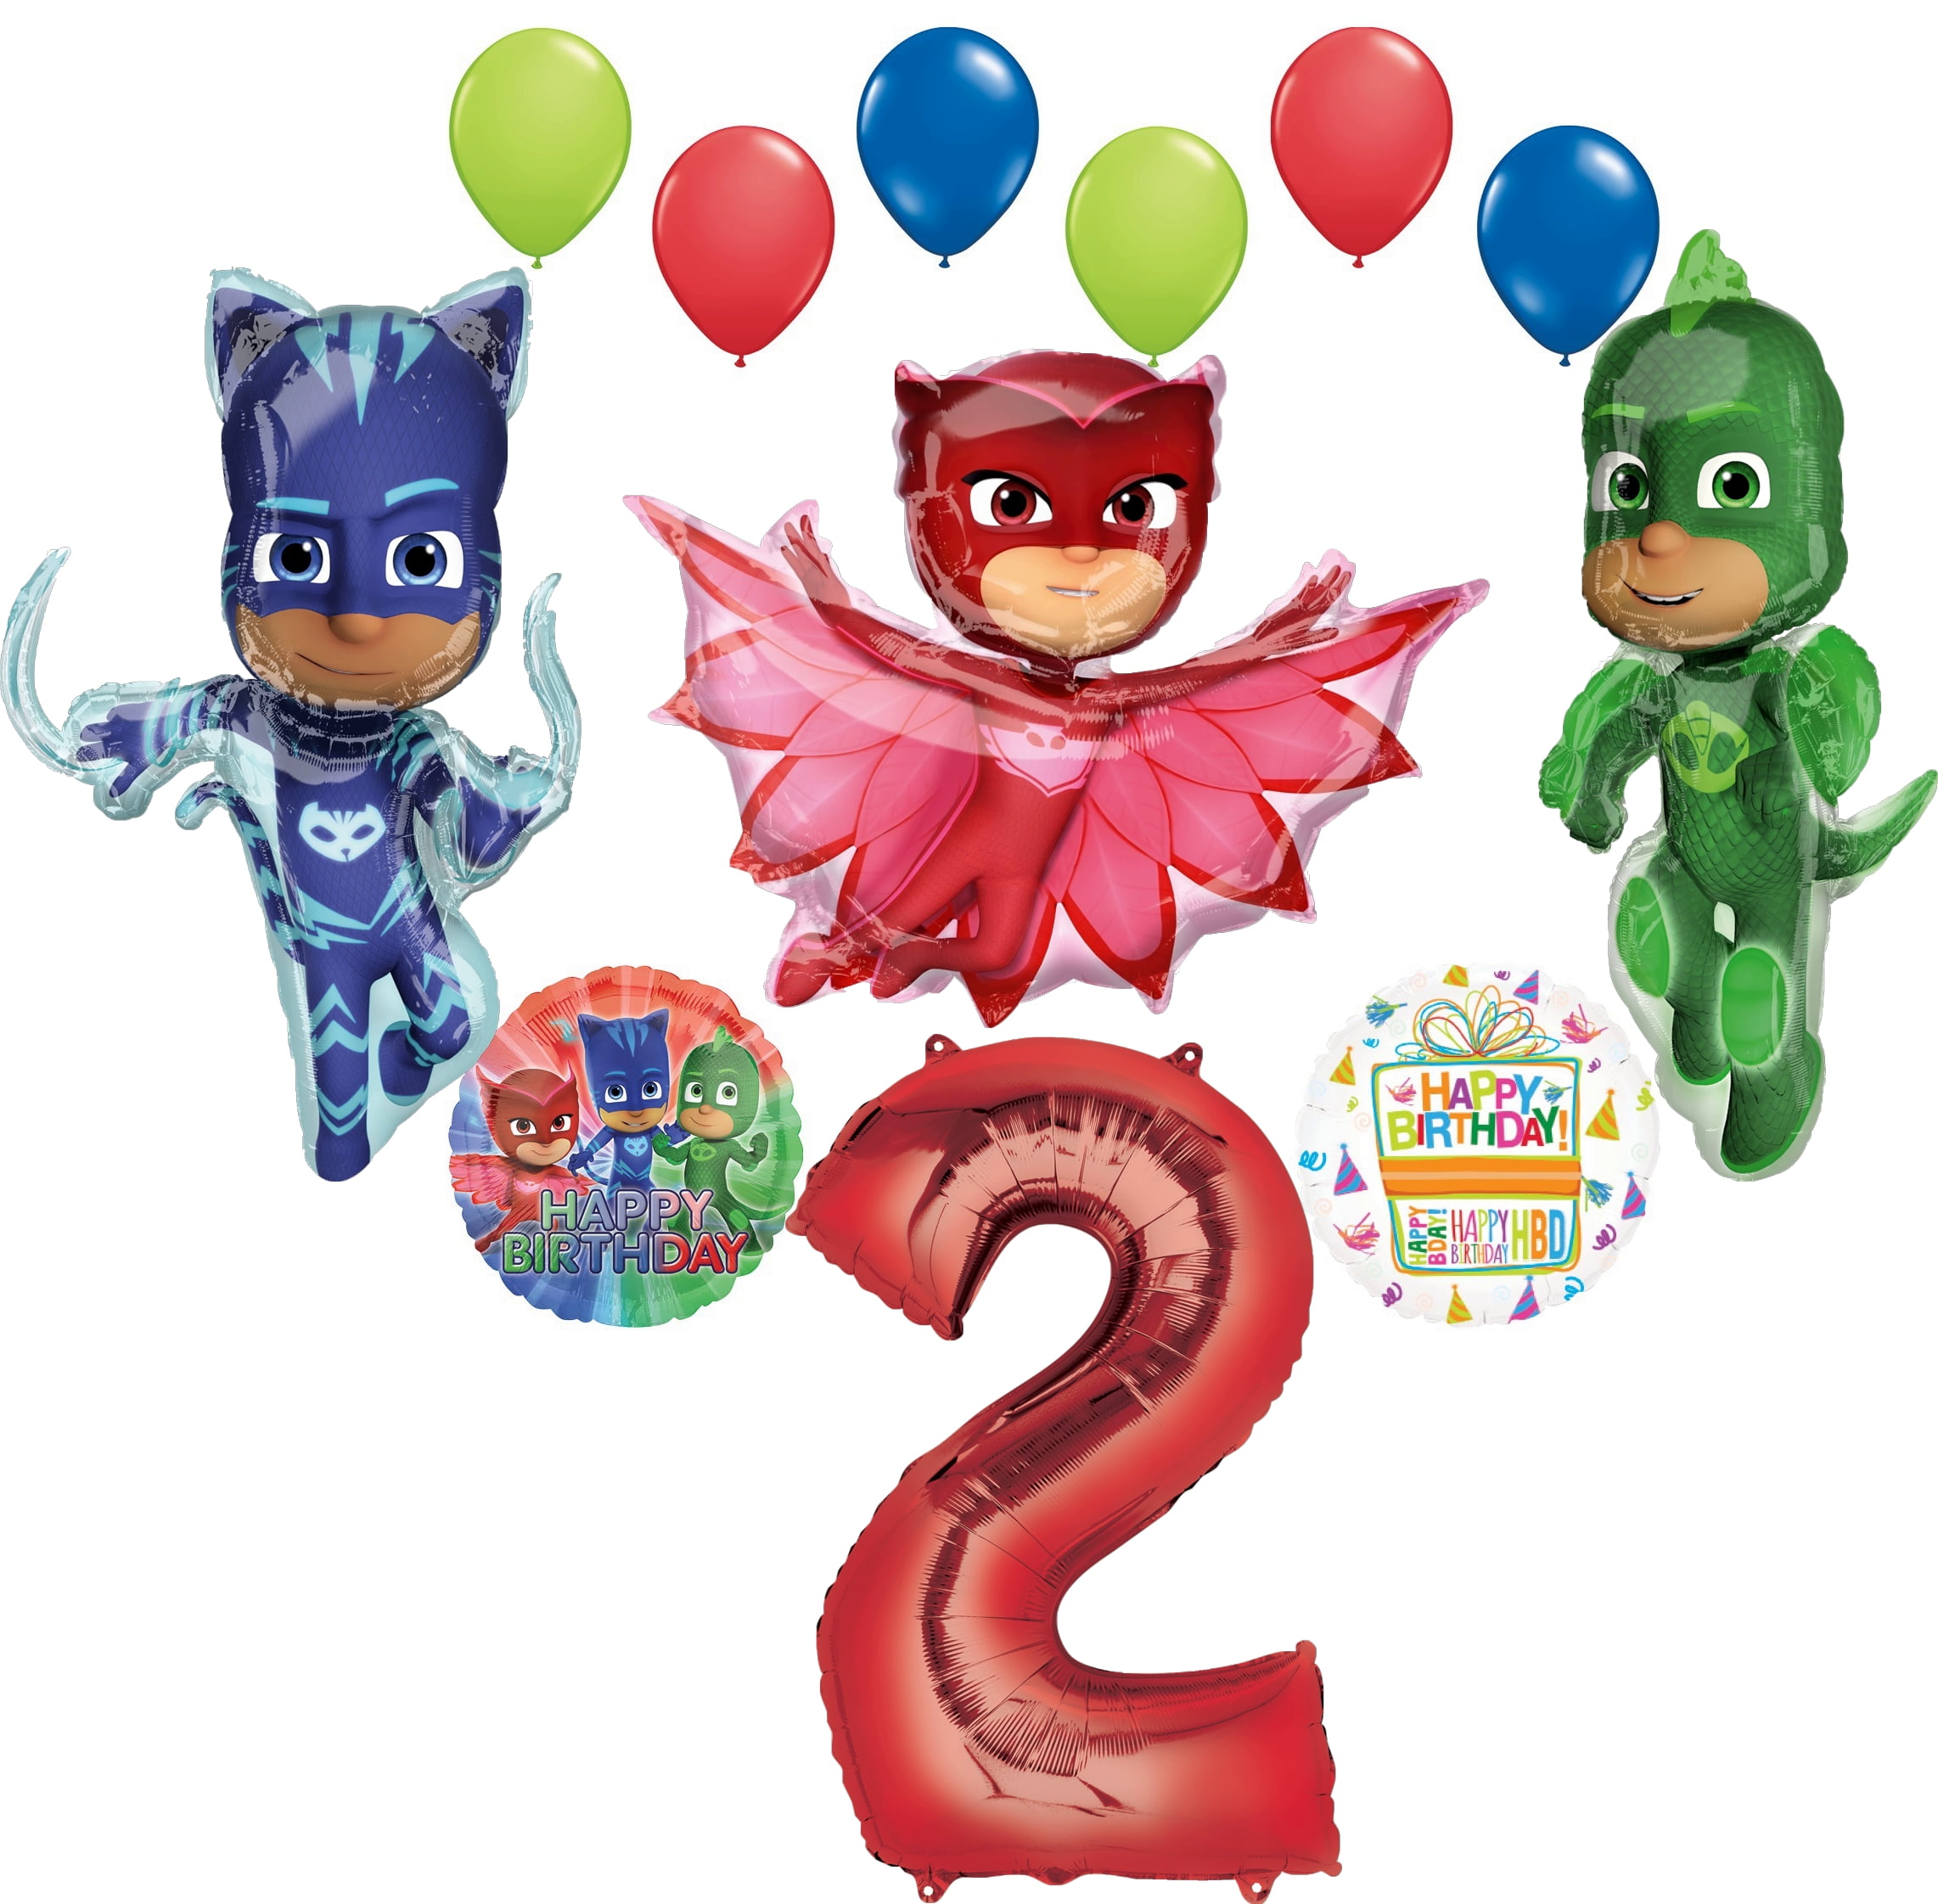 PJ Masks Party Supplies Including Balloons Number 3rd Birthday Curling Ribbon and Printed Ribbon 